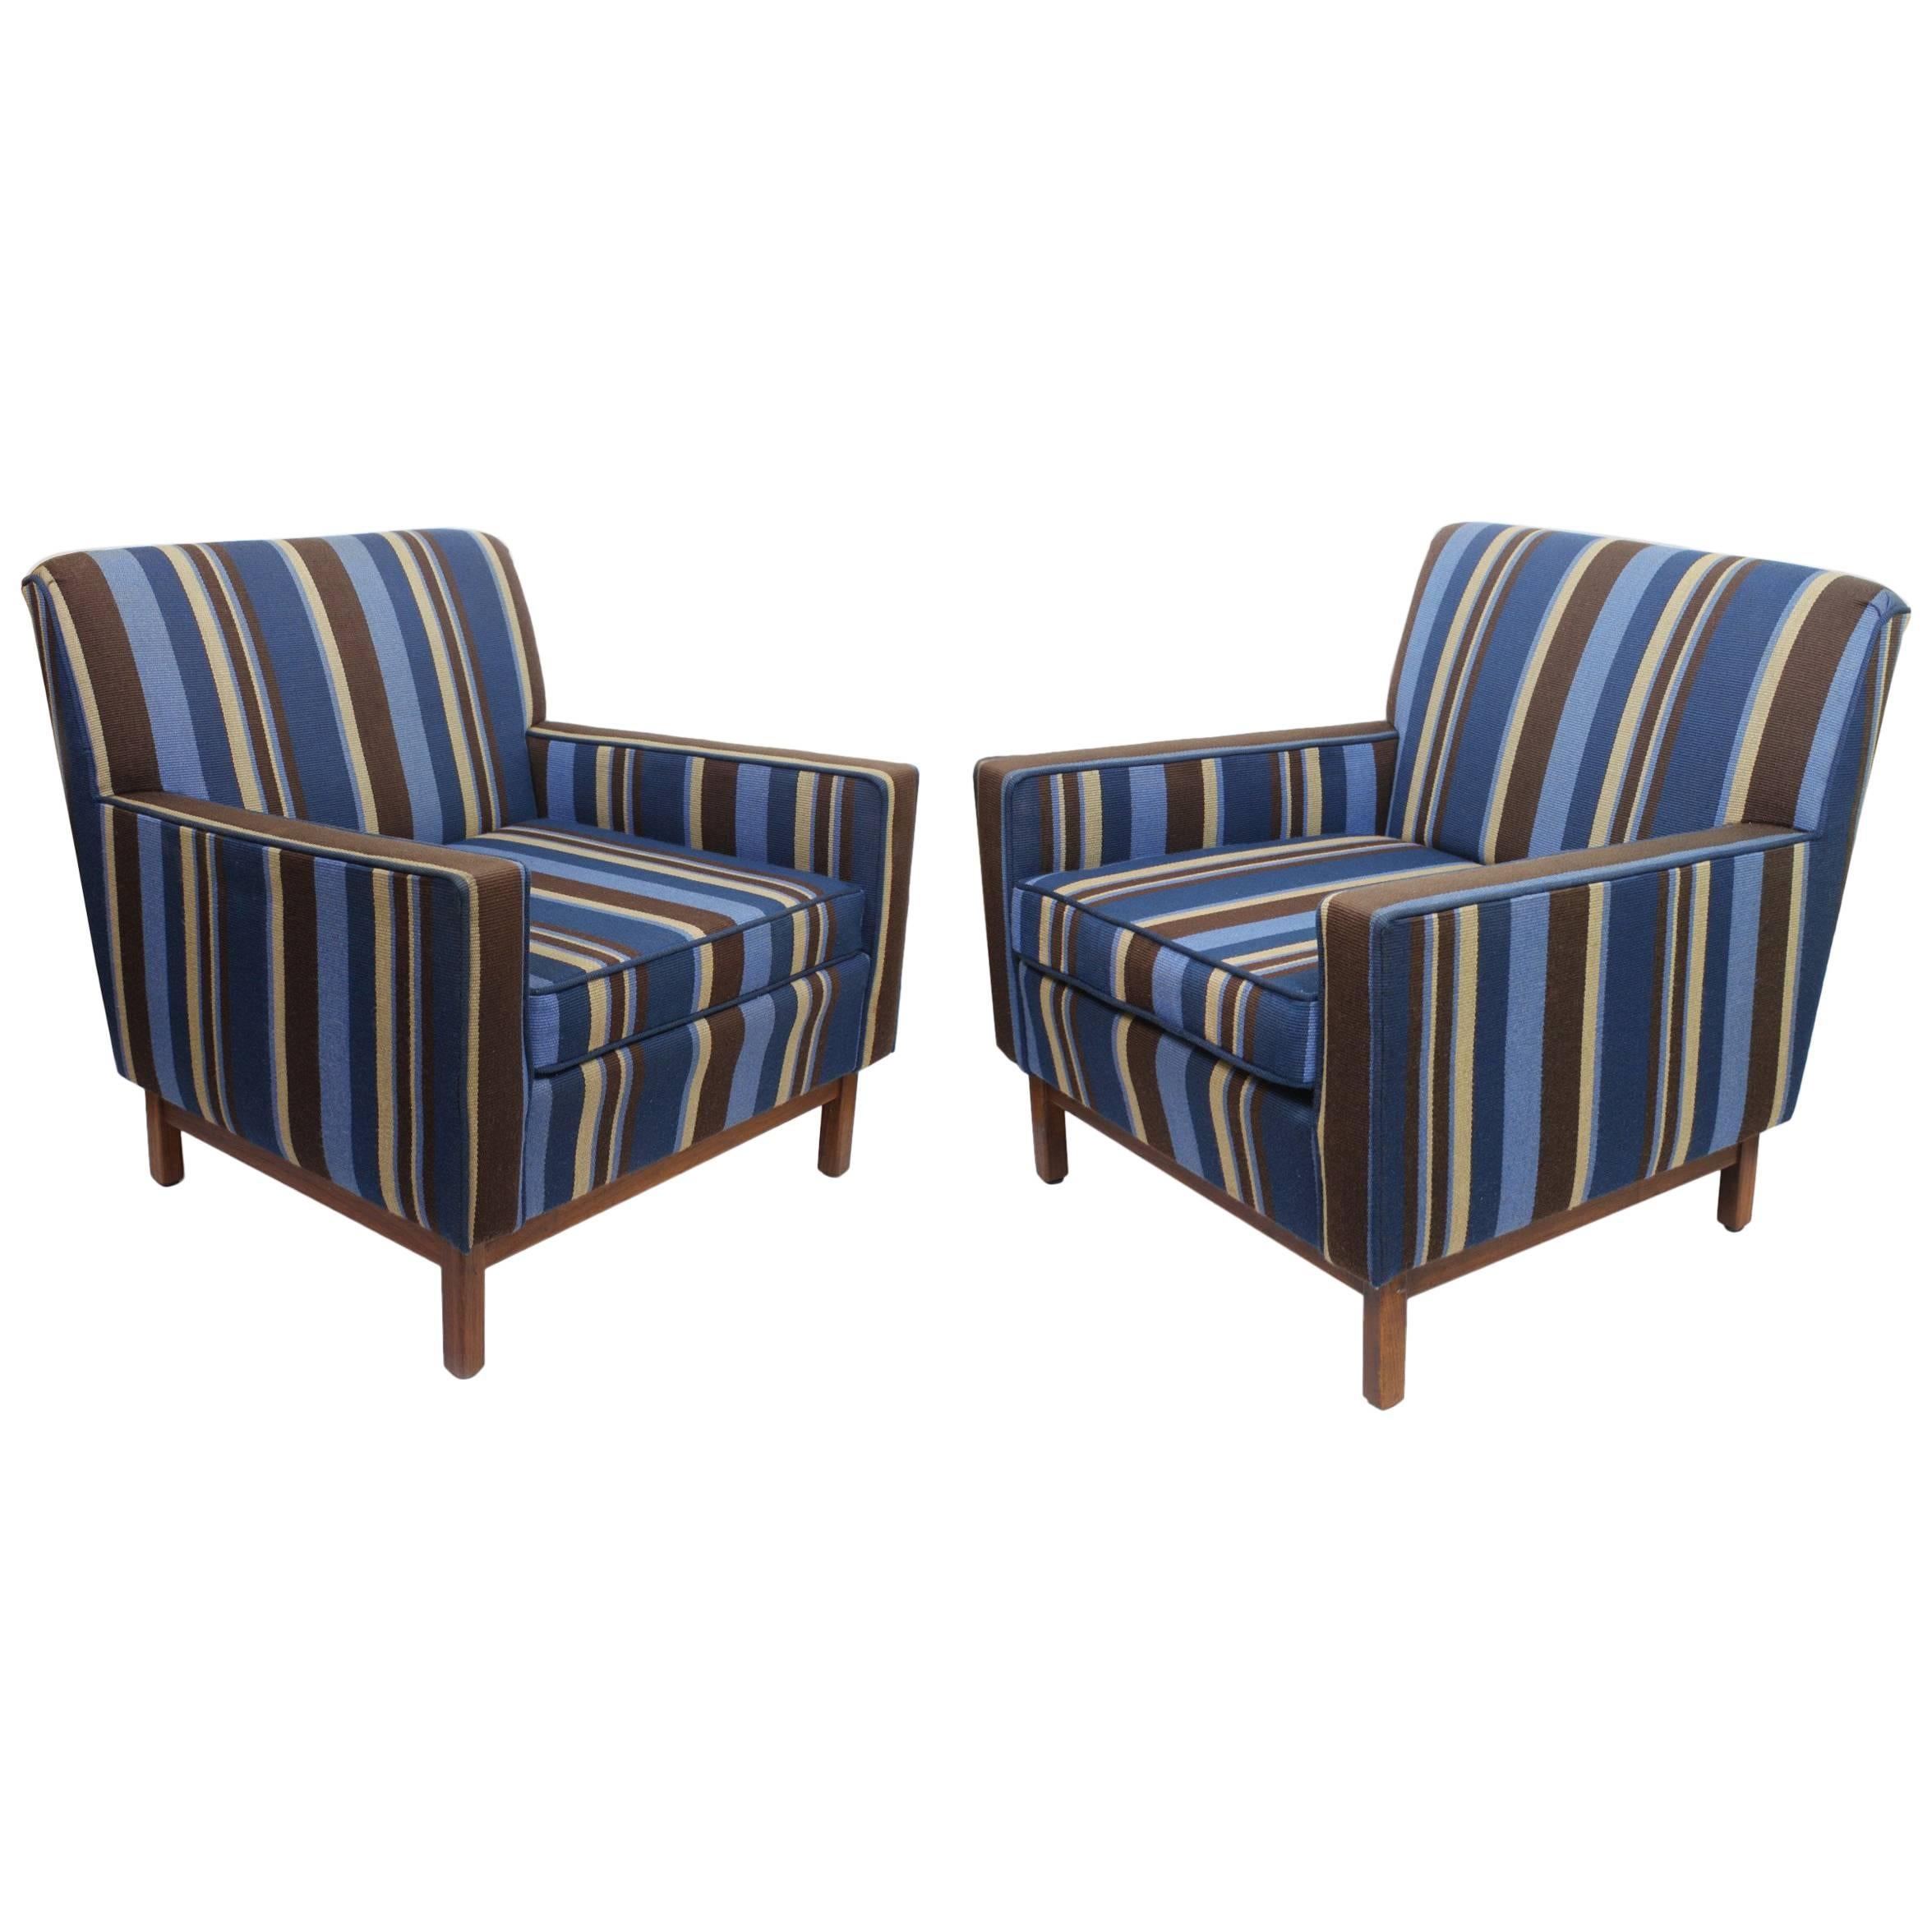 Spectacular Pair of Mid-Century Modern Blue Striped Lounge Chairs by Gunlocke